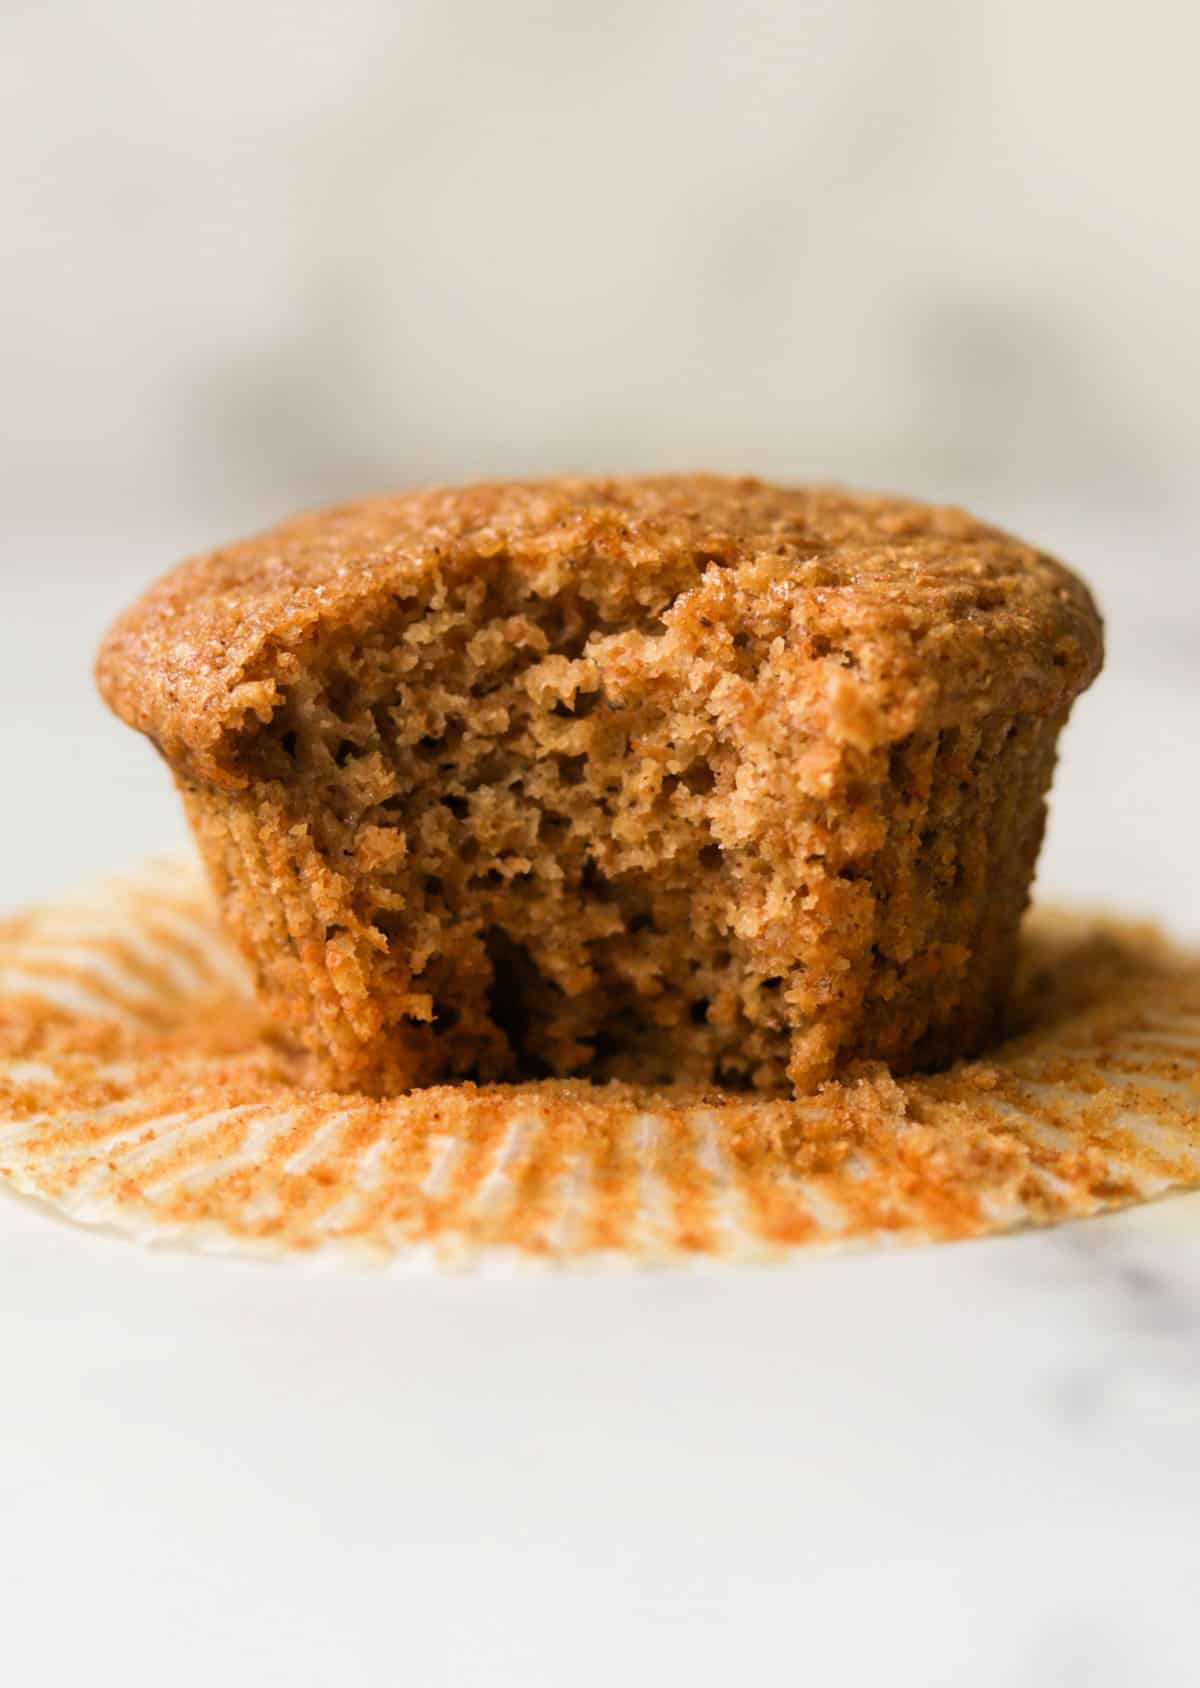 A front shot of a bran muffin with a bite taken out of it.